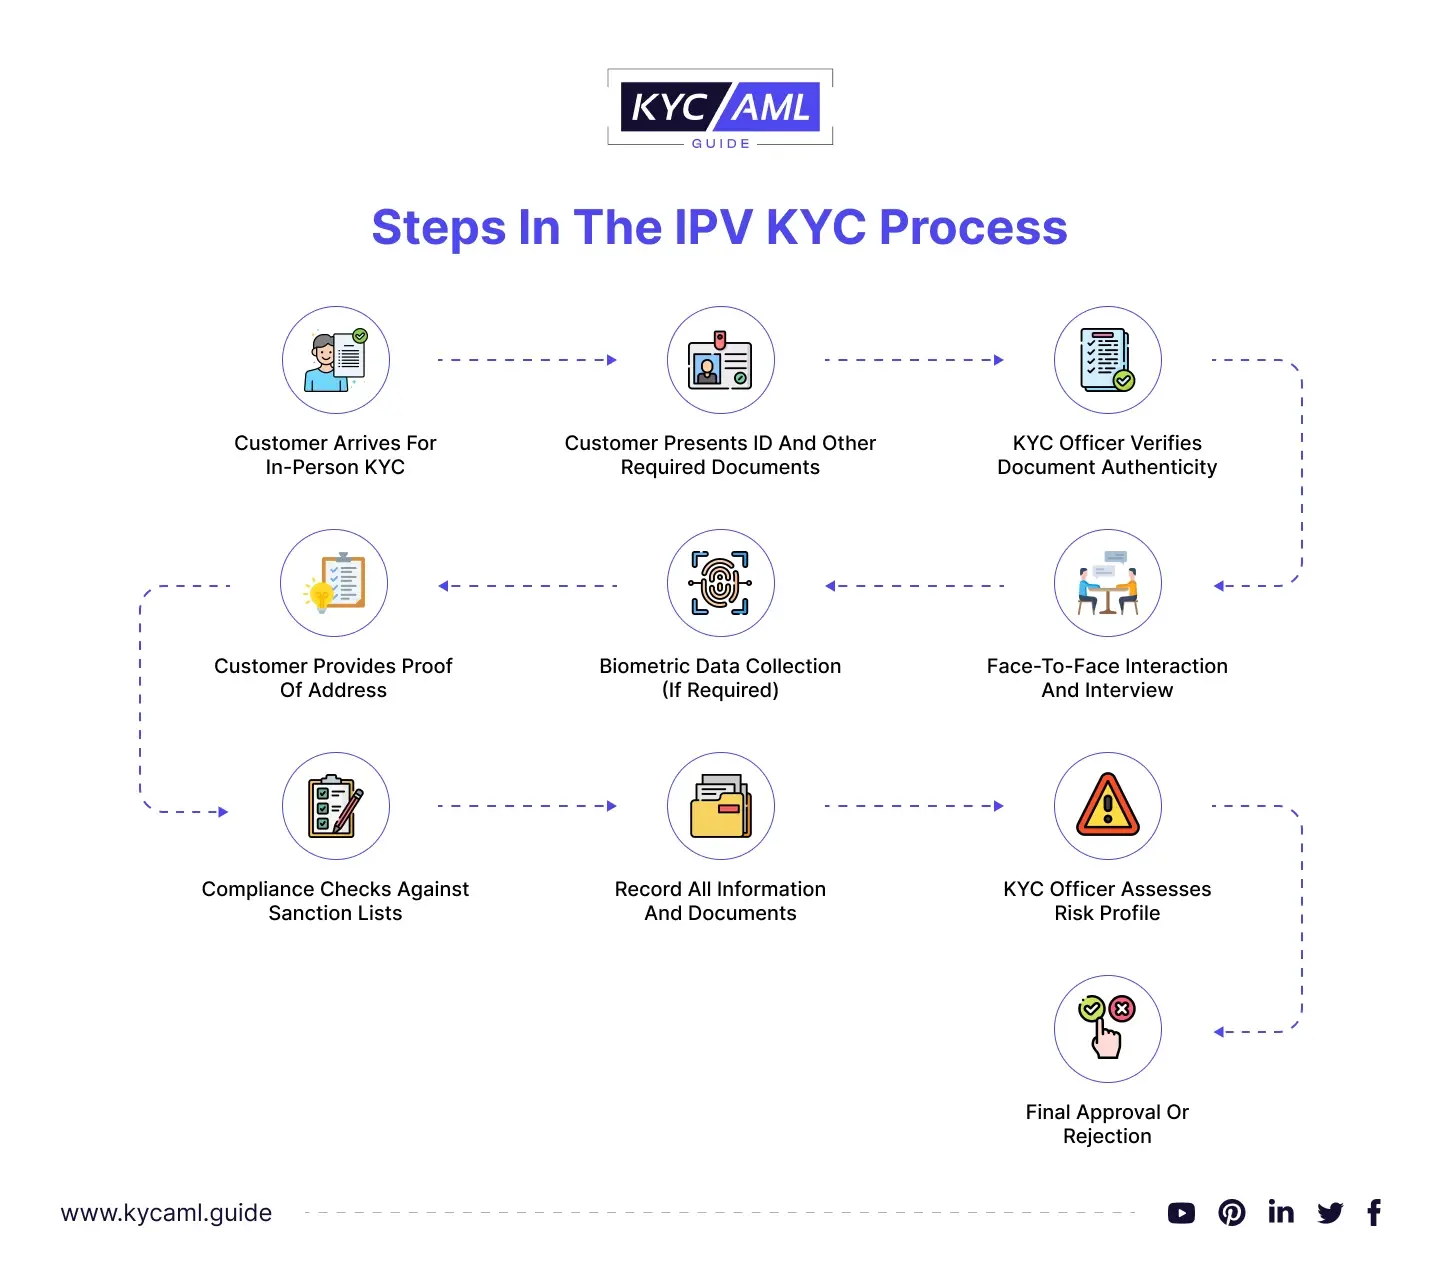 Steps-in-the-IPV-KYC-process